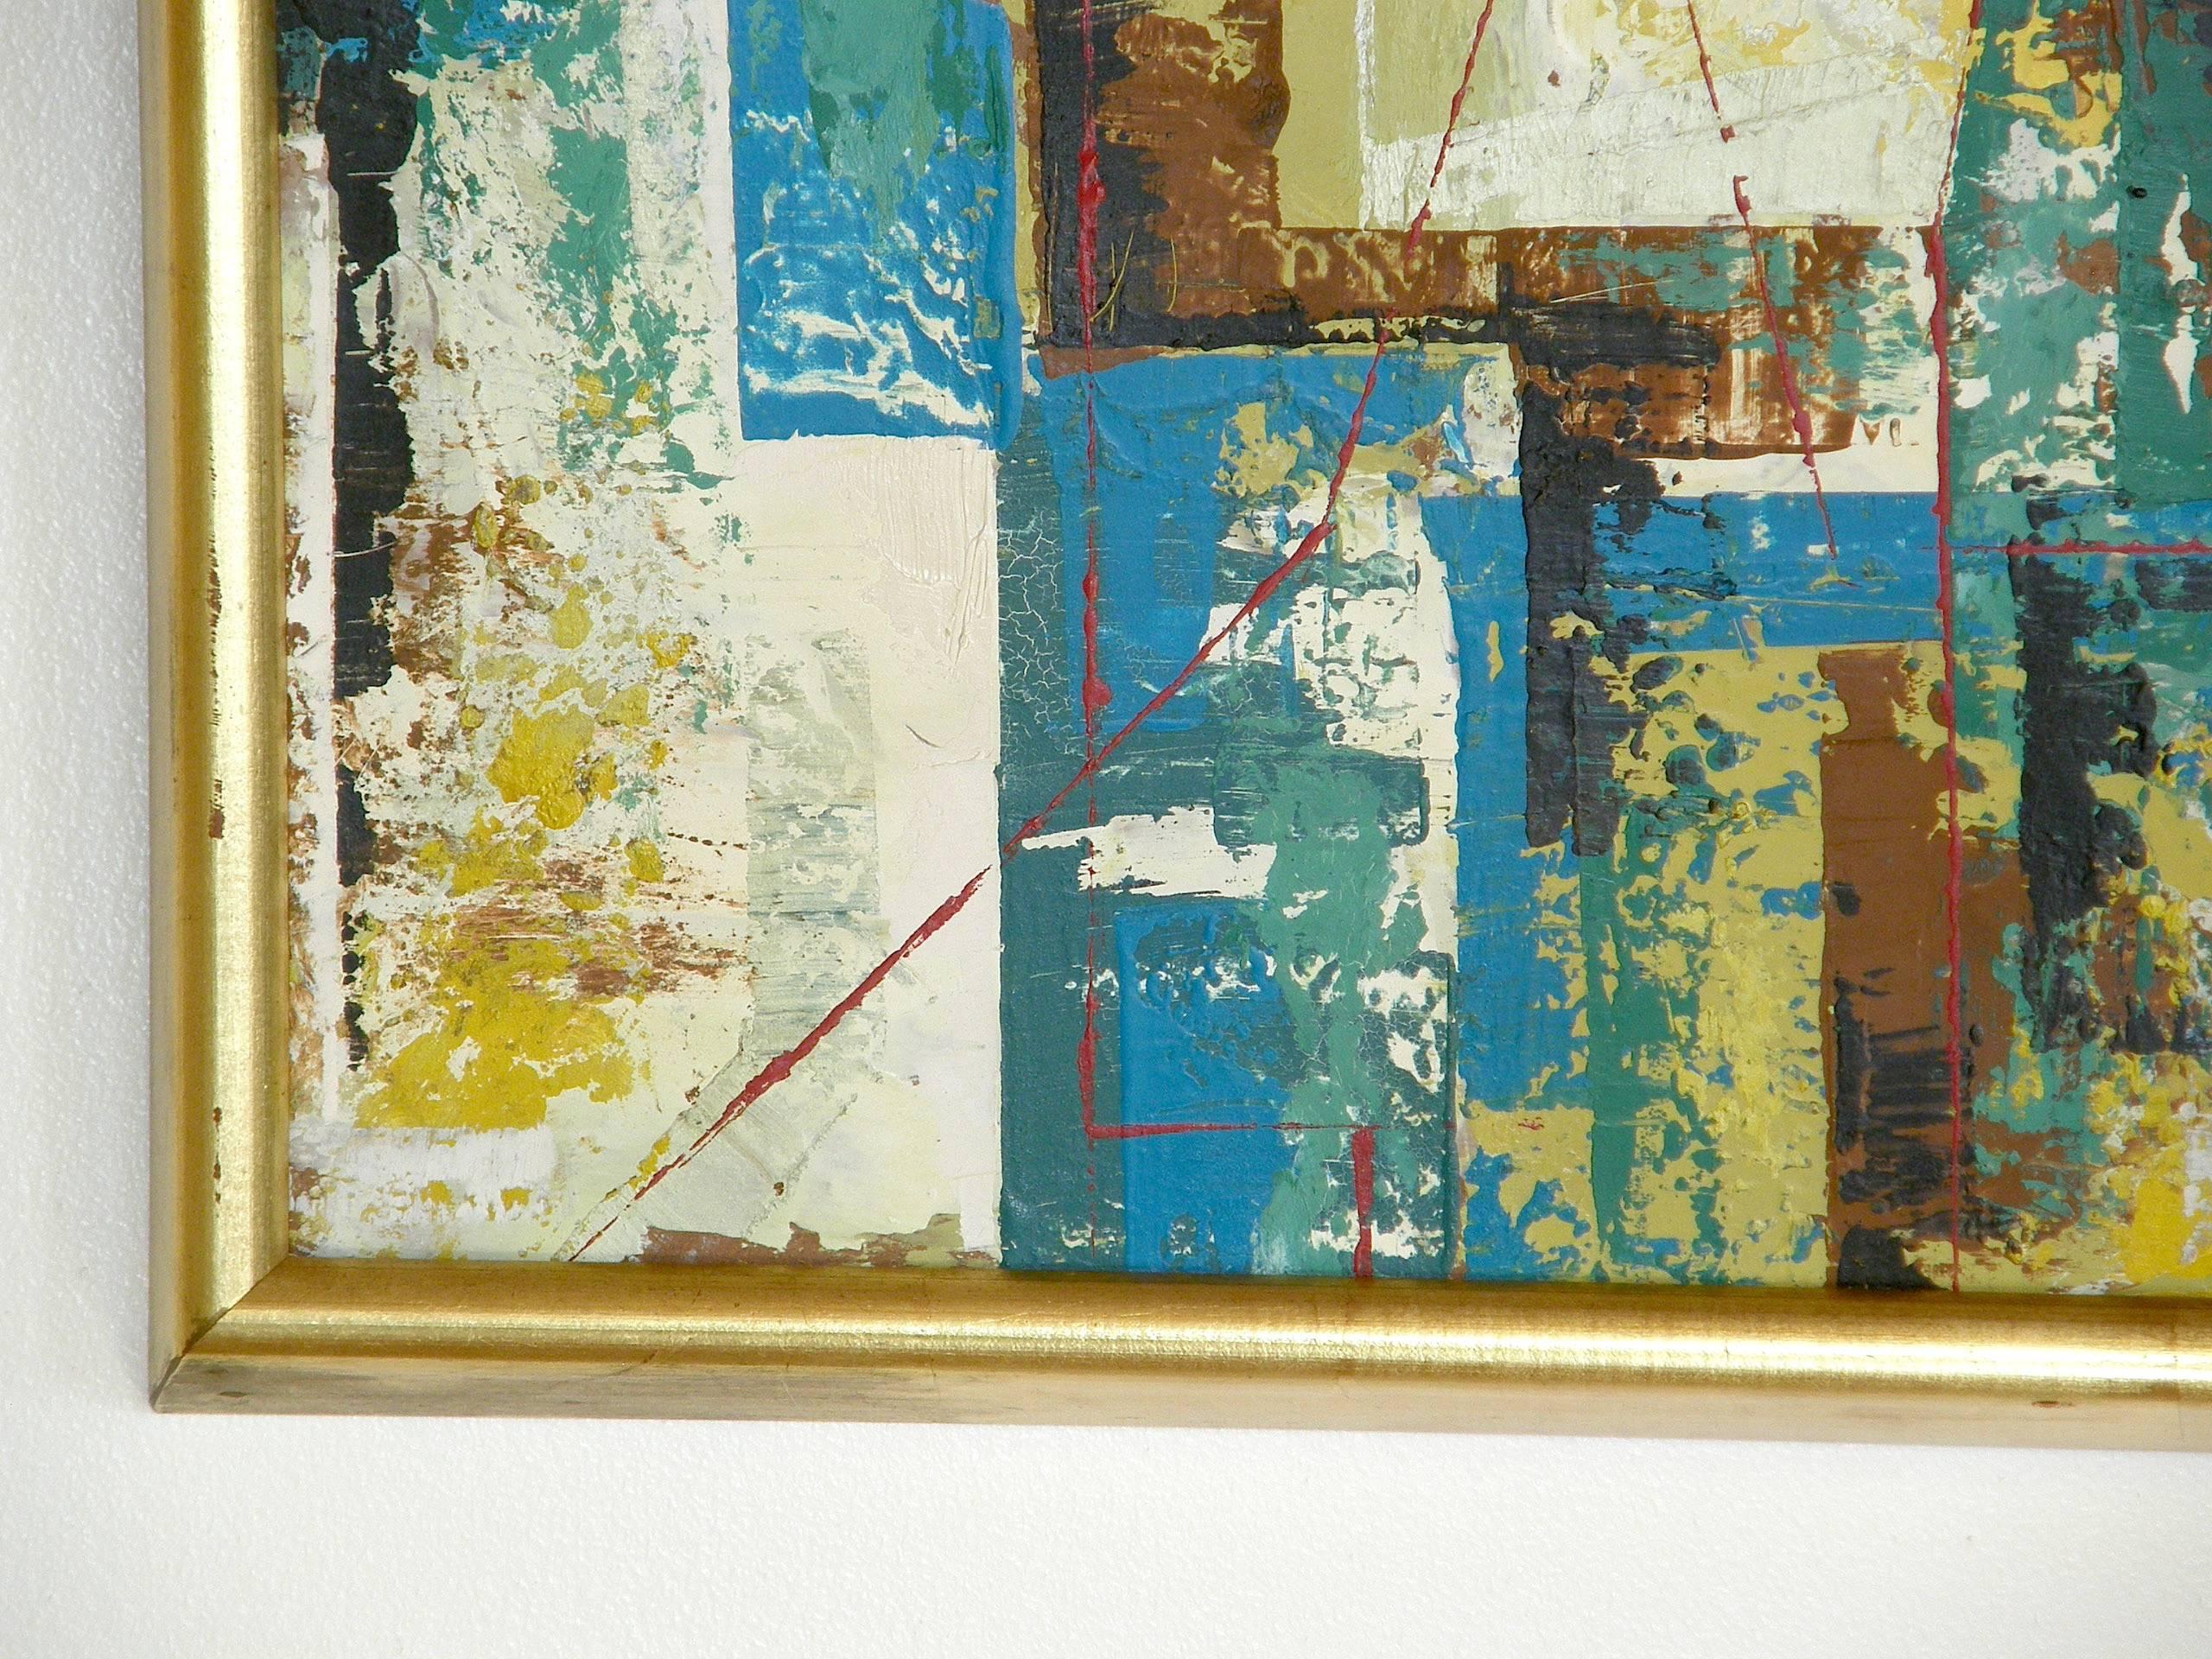 Mid-Century Modern Abstract Cityscape Painting on Board by Chicago Artist William McBride, Jr.